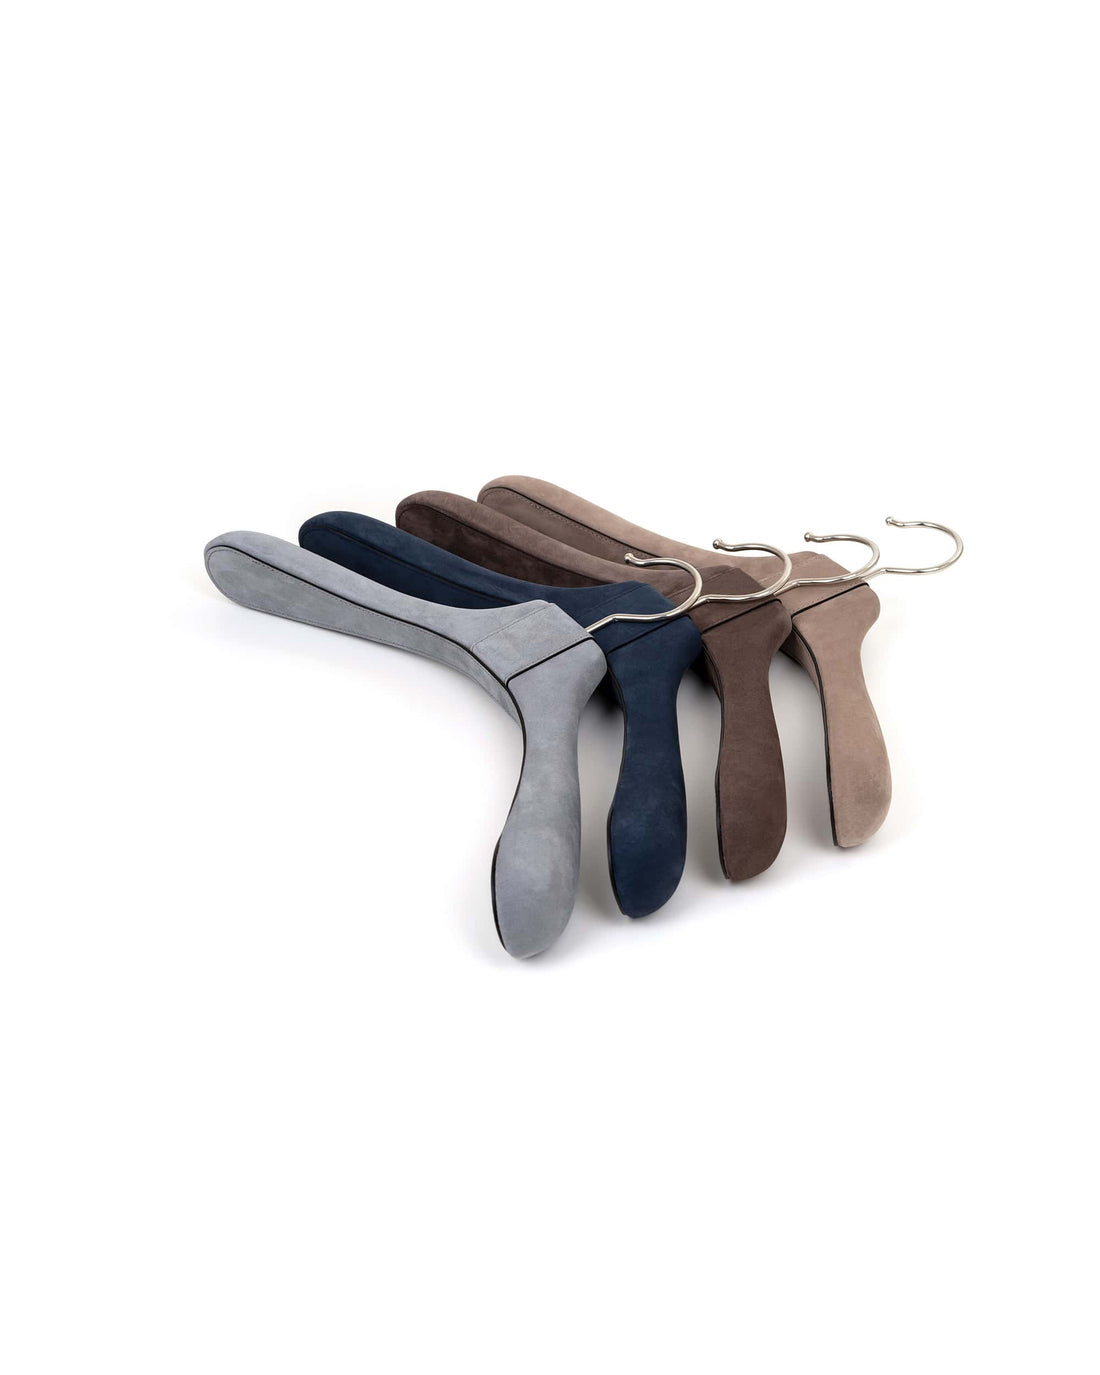 Leather coat hanger - Taupe